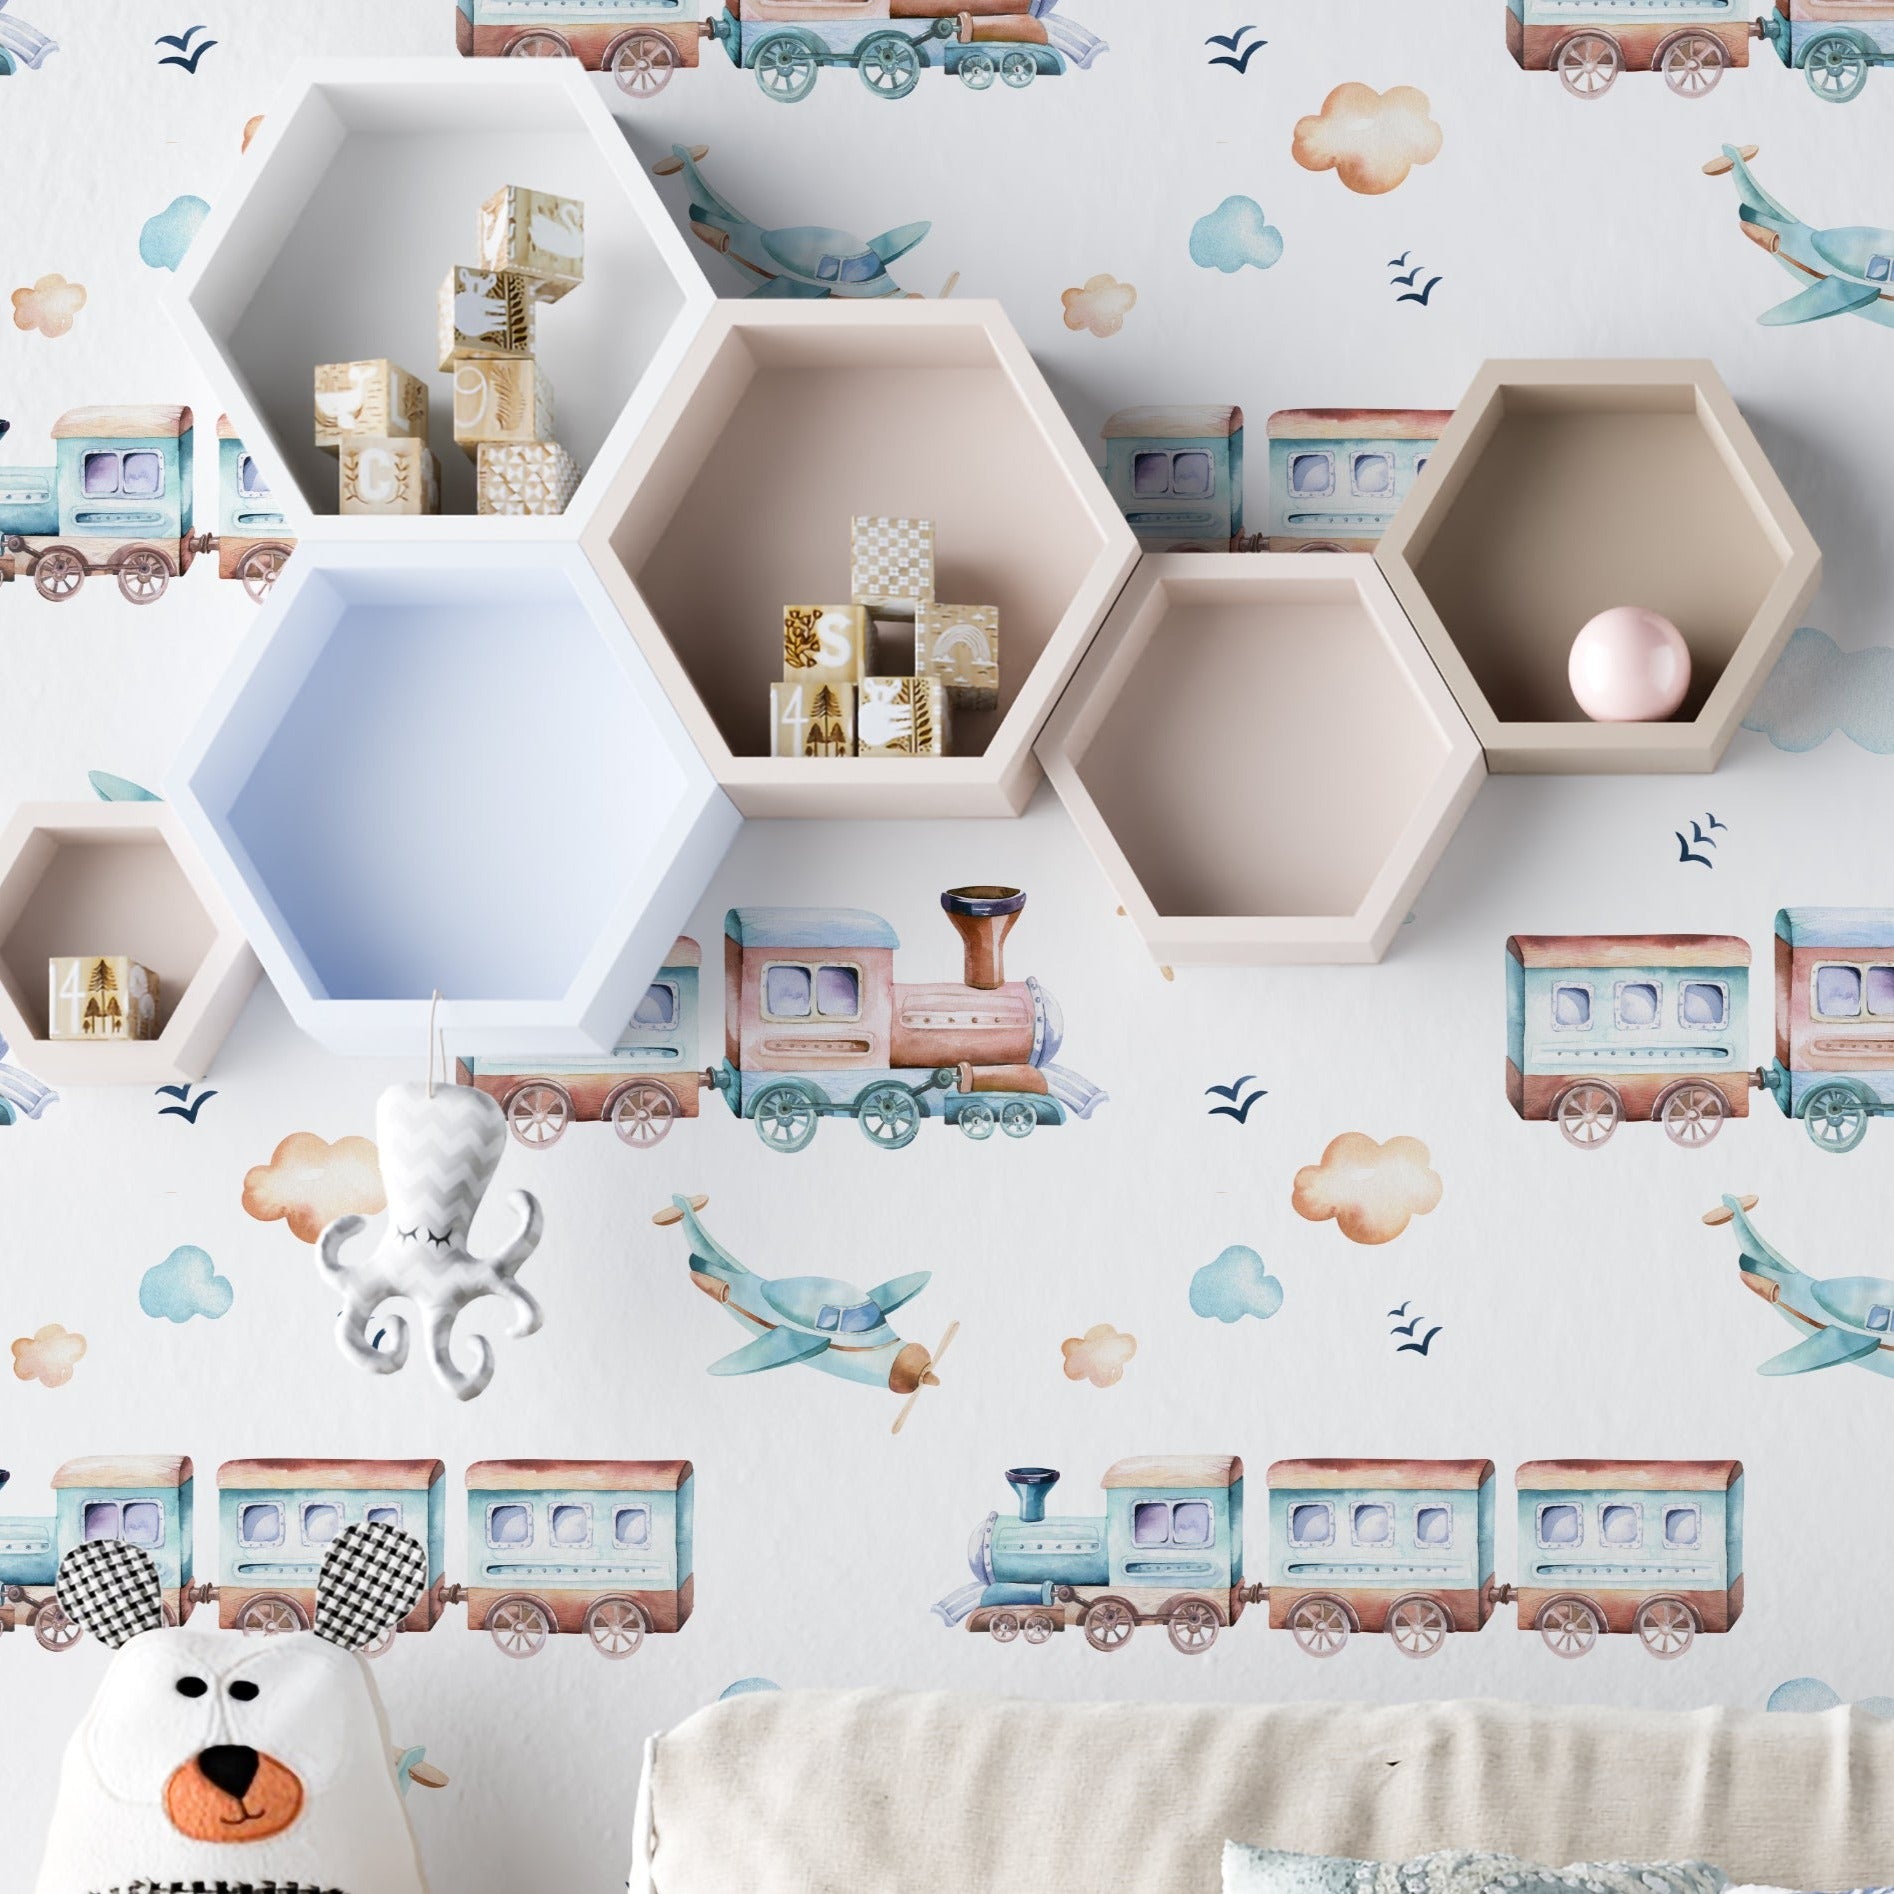 A playful children's room featuring 'Trains and Planes Kids Wallpaper III.' This charming wallpaper includes vintage-style trains and propeller planes interspersed with fluffy clouds and tiny birds, creating an adventurous sky scene. The room is enhanced with hexagonal shelves and whimsical decor, making it a perfect haven for young explorers